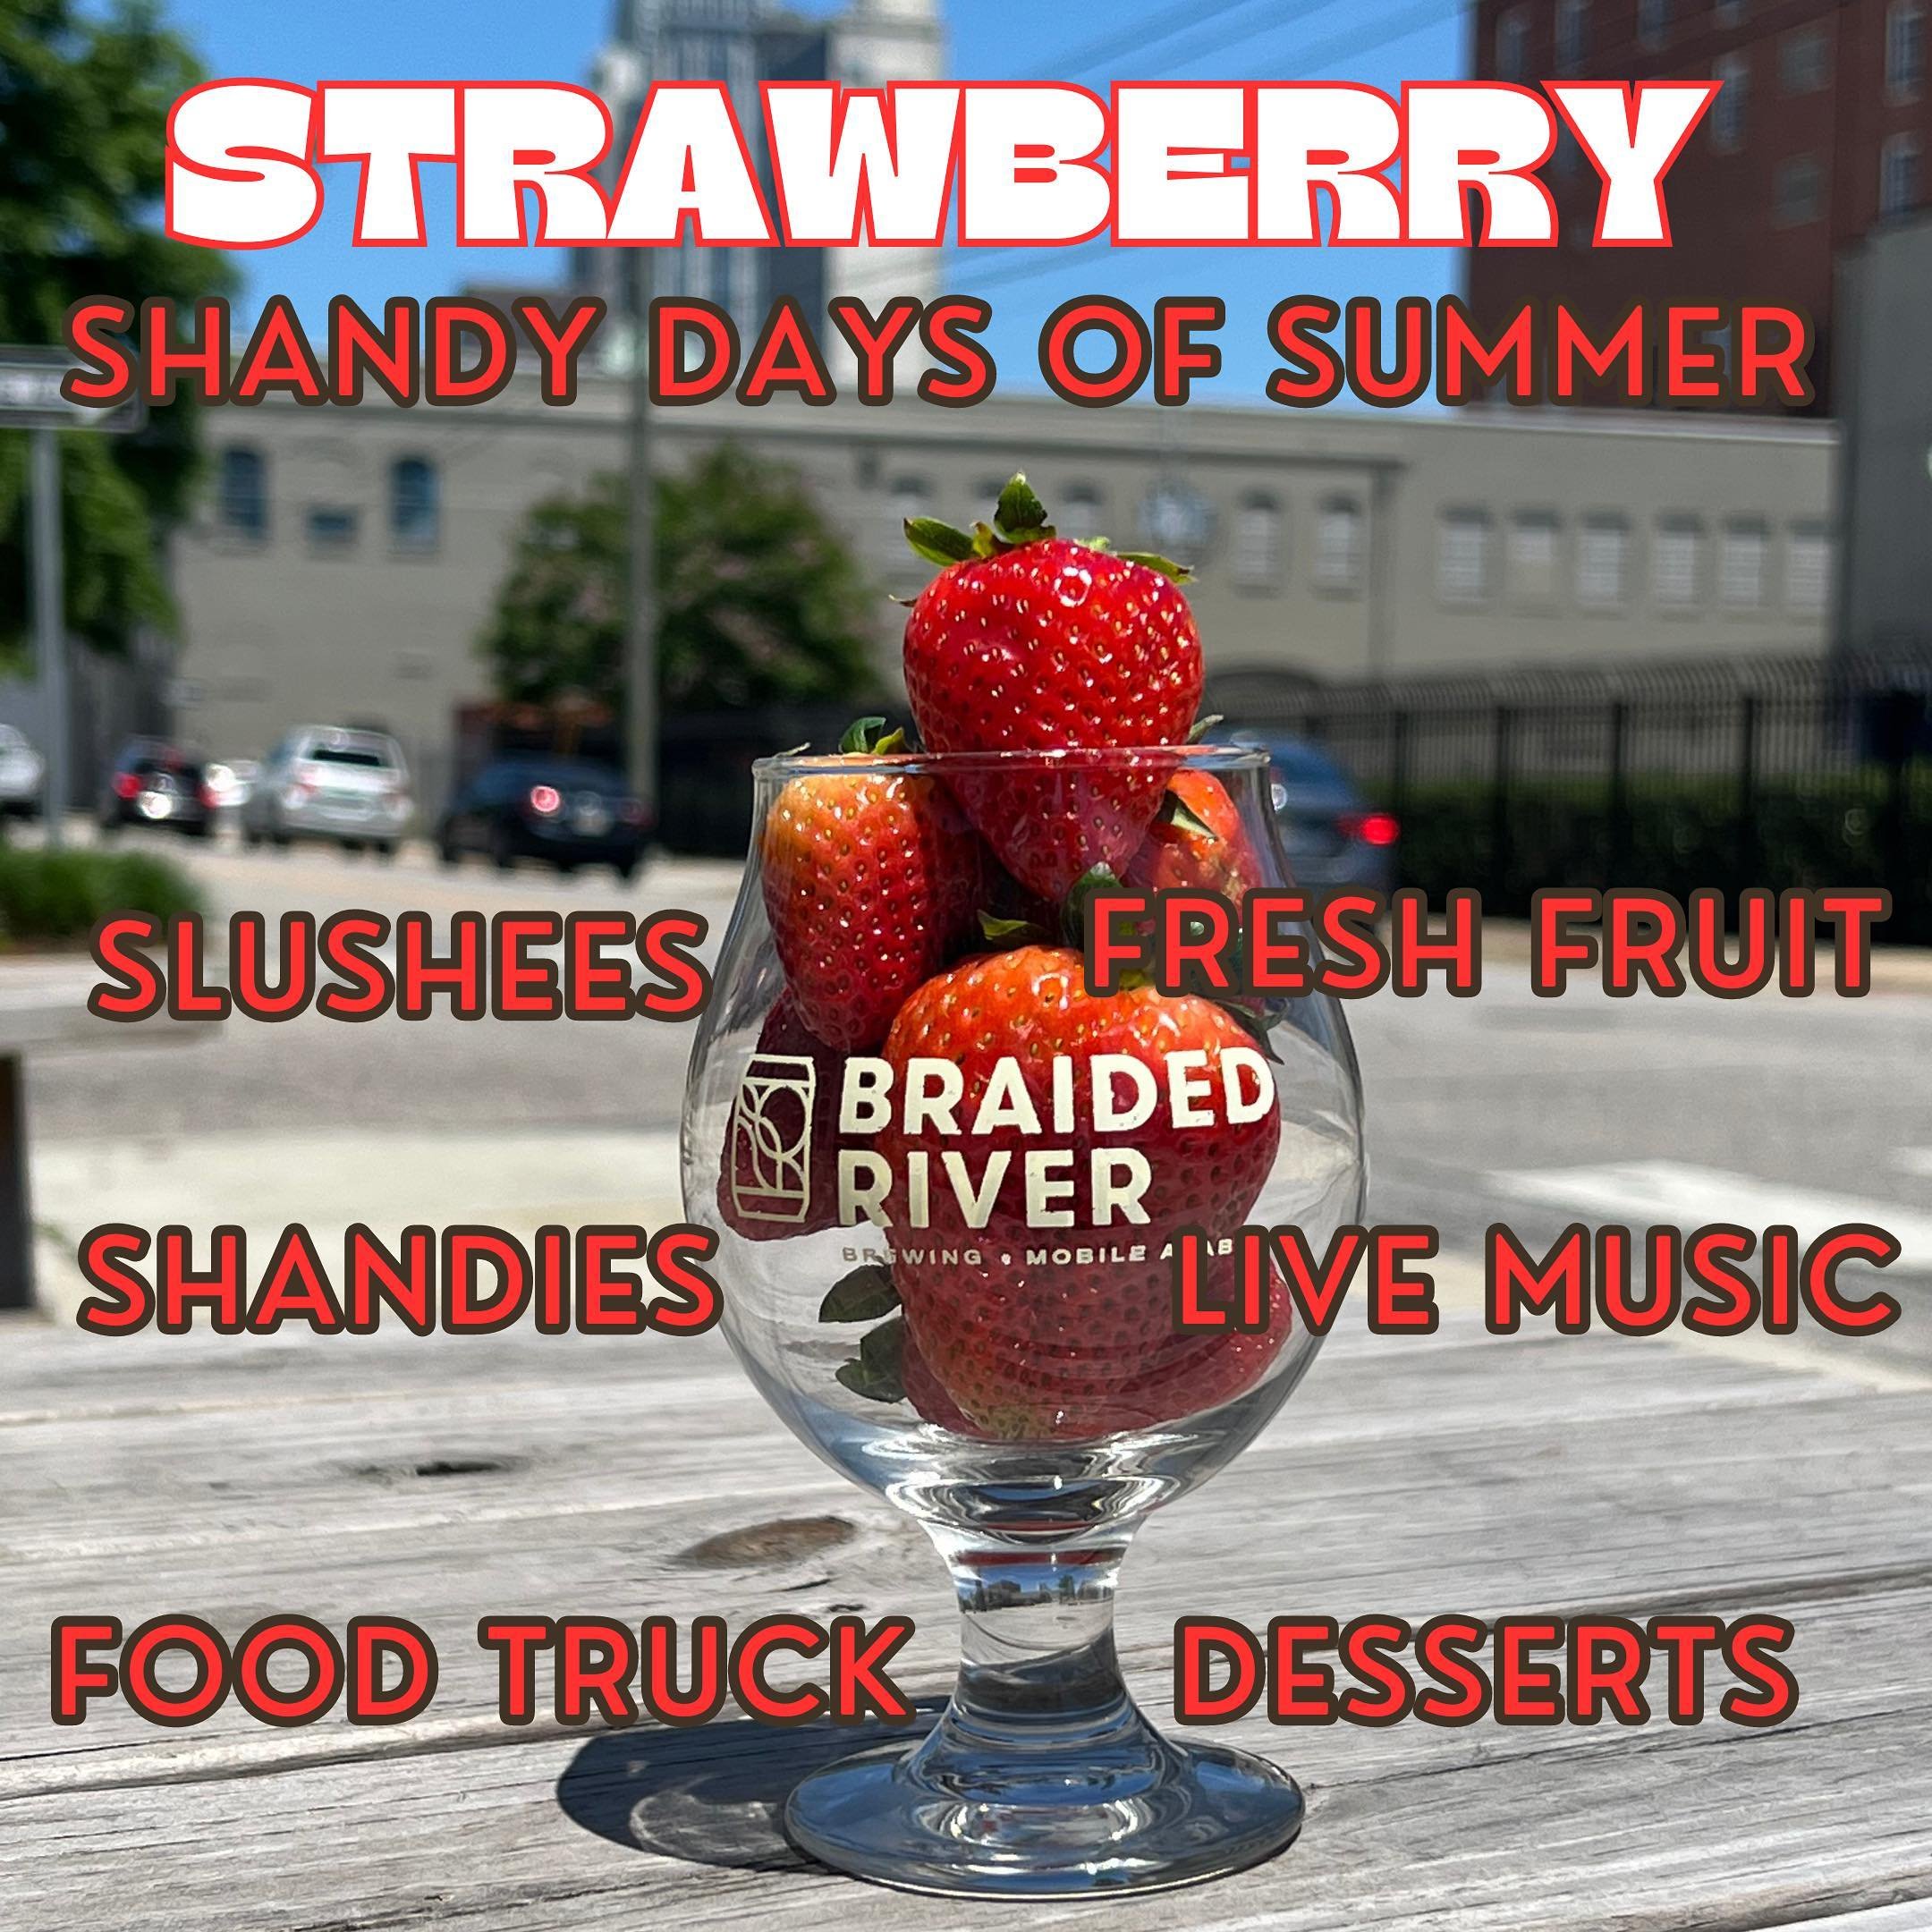 This weekend join us for the first SHANDY DAYS OF SUMMER beginning Friday with STRAWBERRY 🍓 featuring:

🍺 Strawberry beer shandies!
🎸 Live music from Bronson Webb at 6
🍰 Strawberry desserts from Bread by Beck
🍤 Food from P&amp;L Seafood truck at